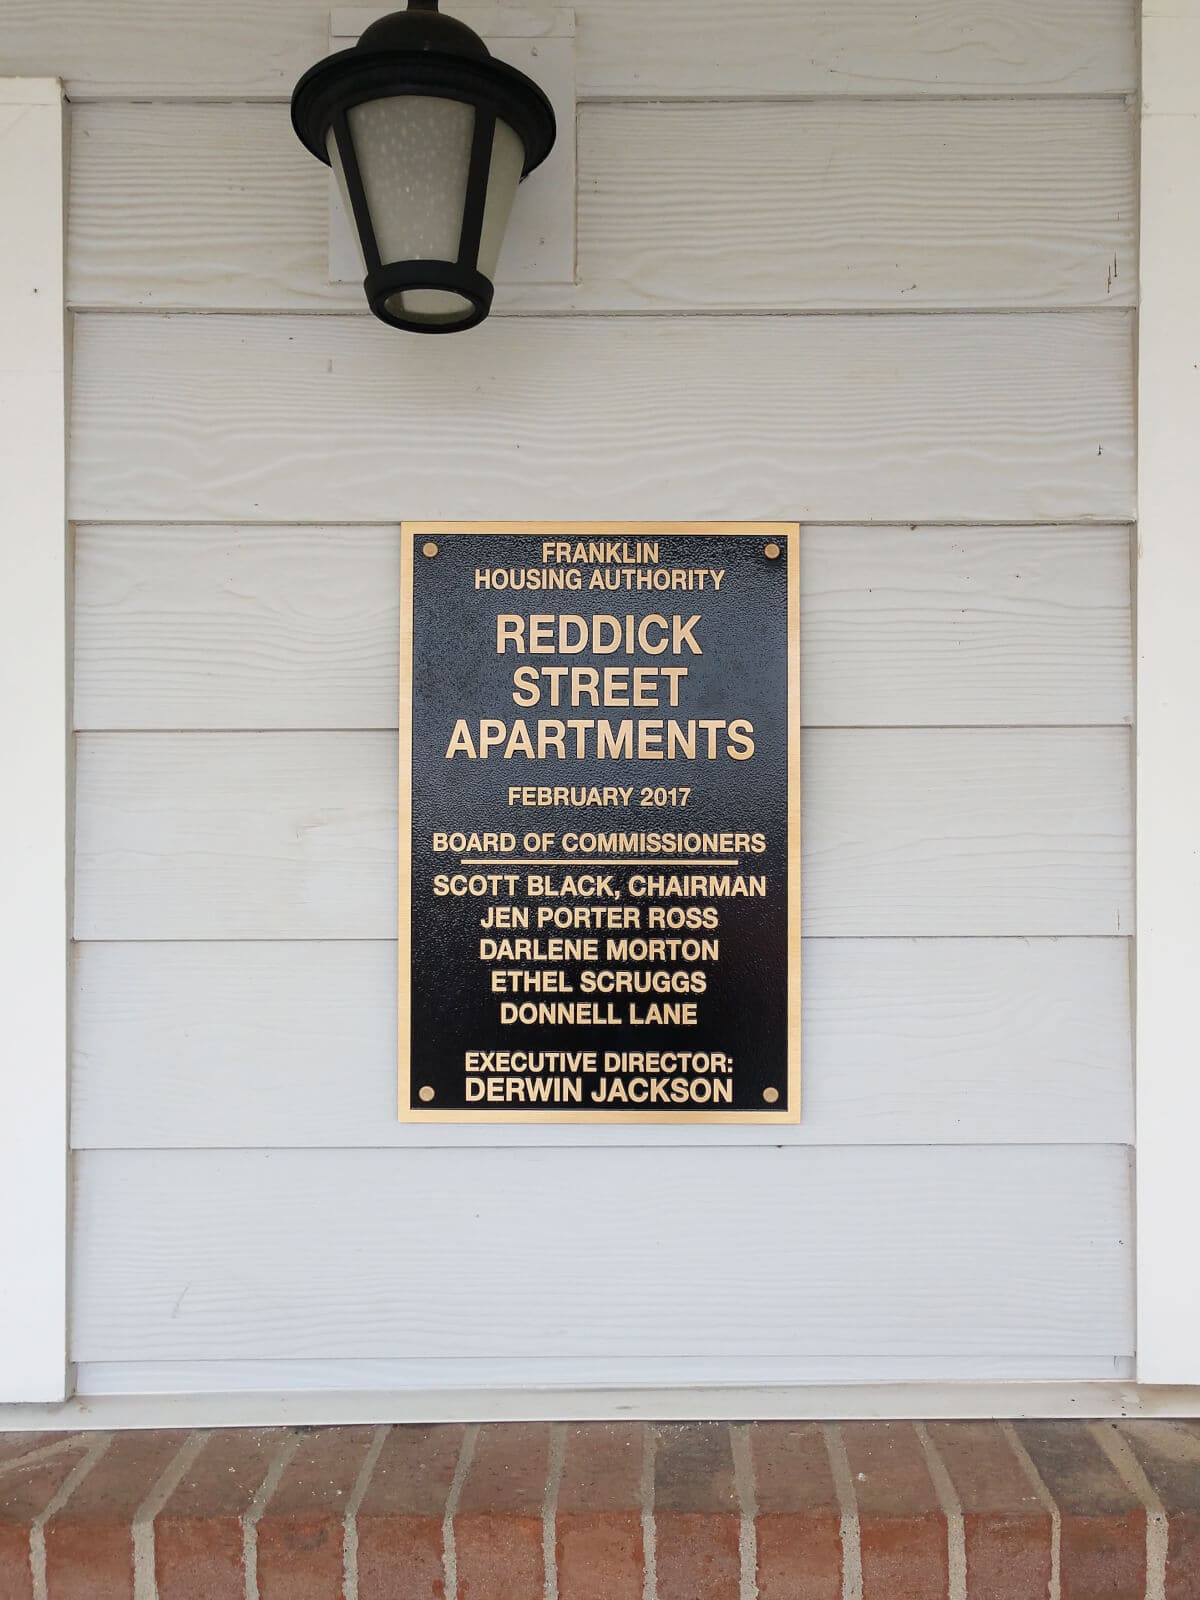 Custom Plaque for the Franklin Housing Authority by 12-Point SignWorks in Franklin, TN.